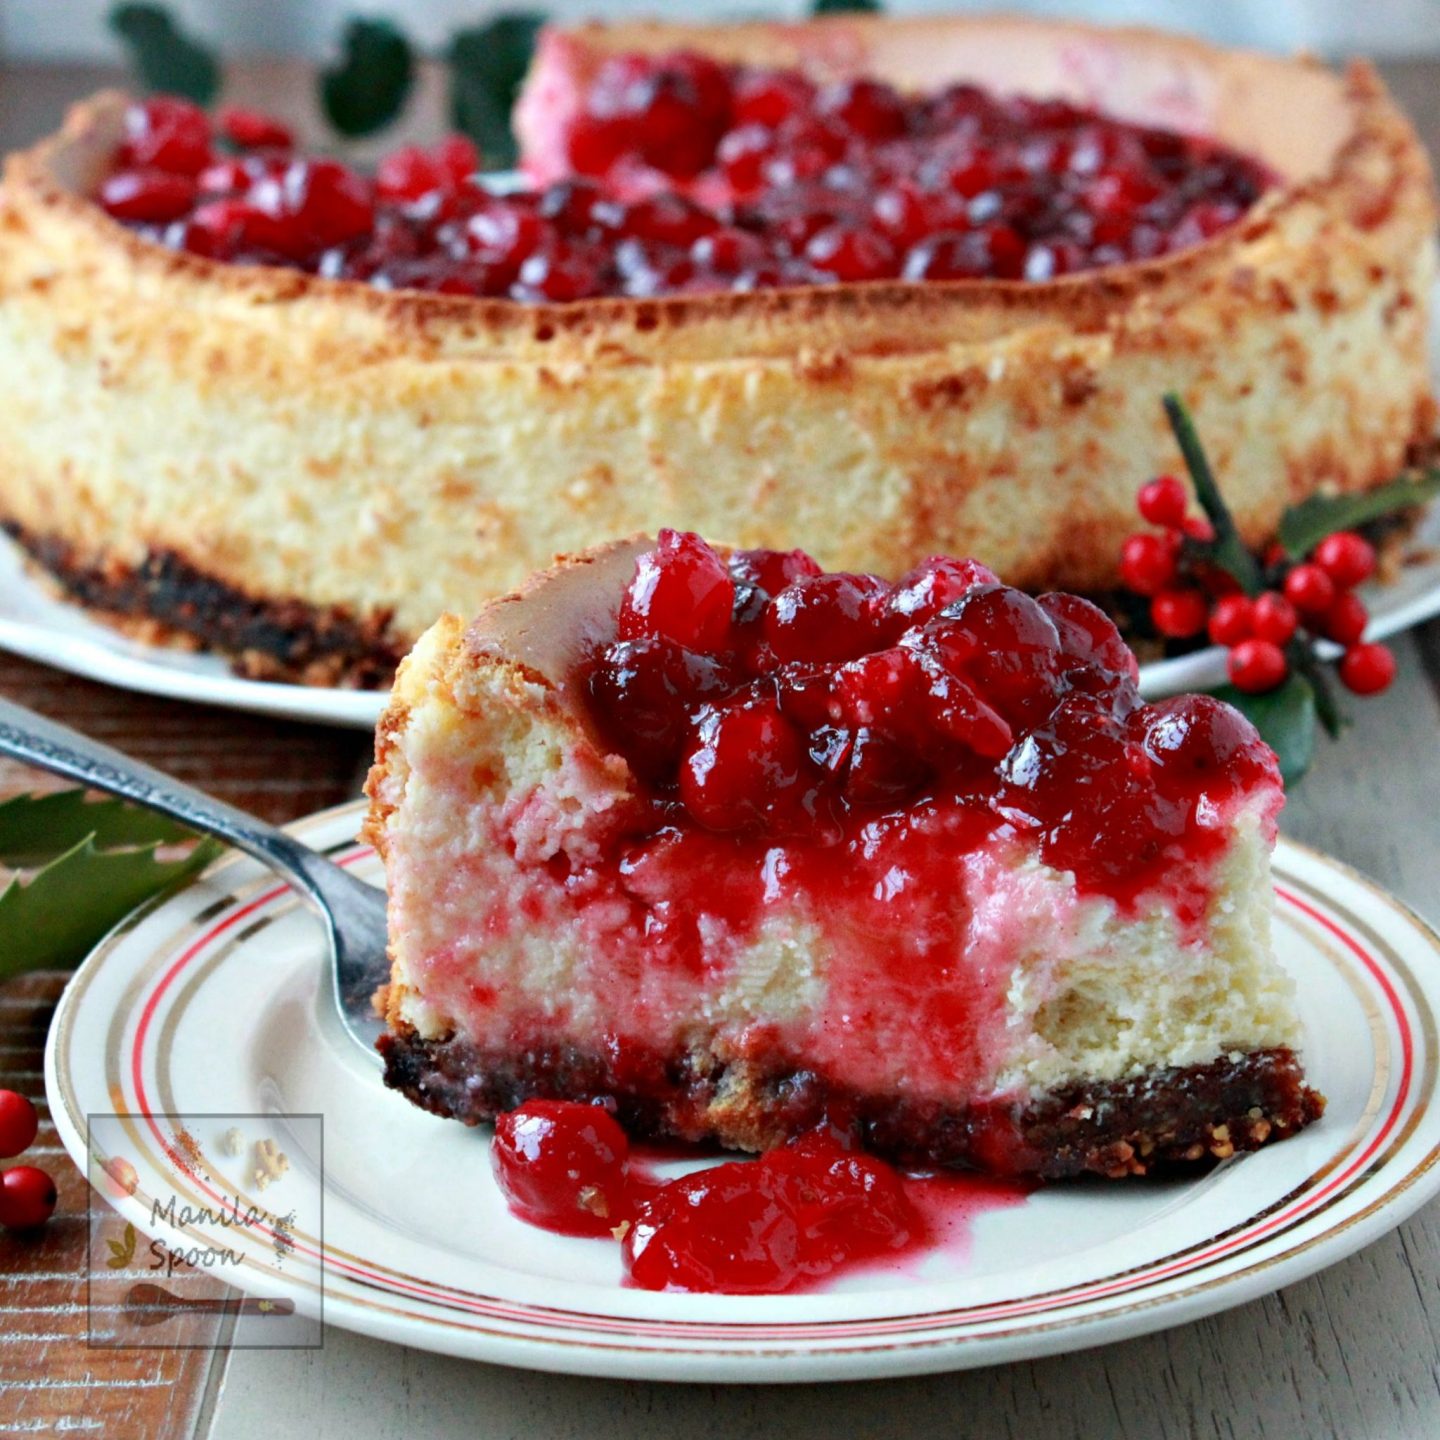 A deliciously creamy holiday cheesecake topped with a luscious sweet-tangy and perfectly spiced cranberry sauce. It is completely gluten-free so it's perfect for those on a wheat-free diet!